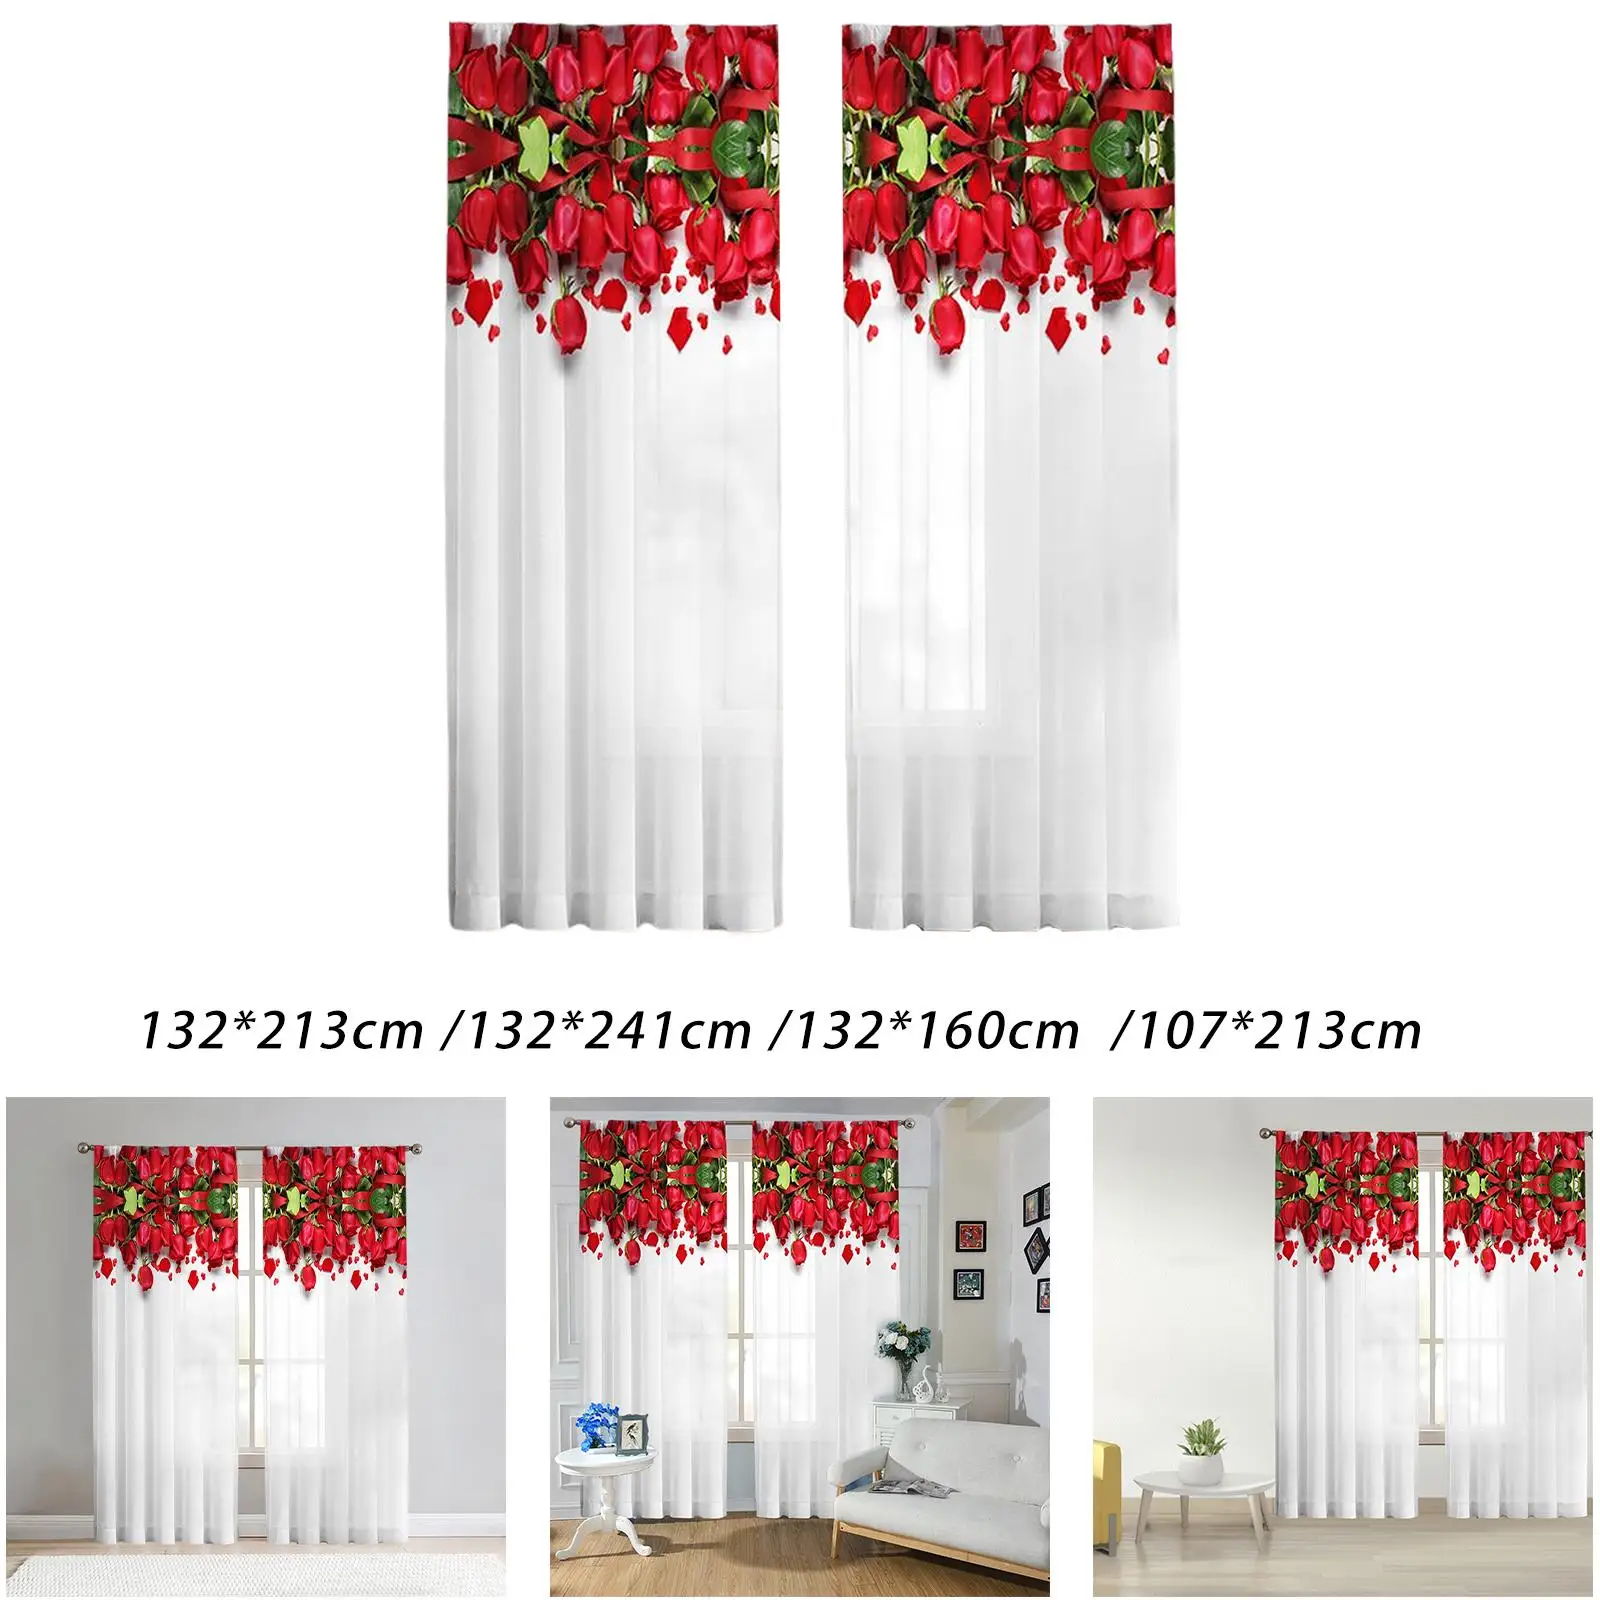 2Pcs Spring Flower Curtains , Rod Pocket Window Curtain Drapes for Bedroom Living Room